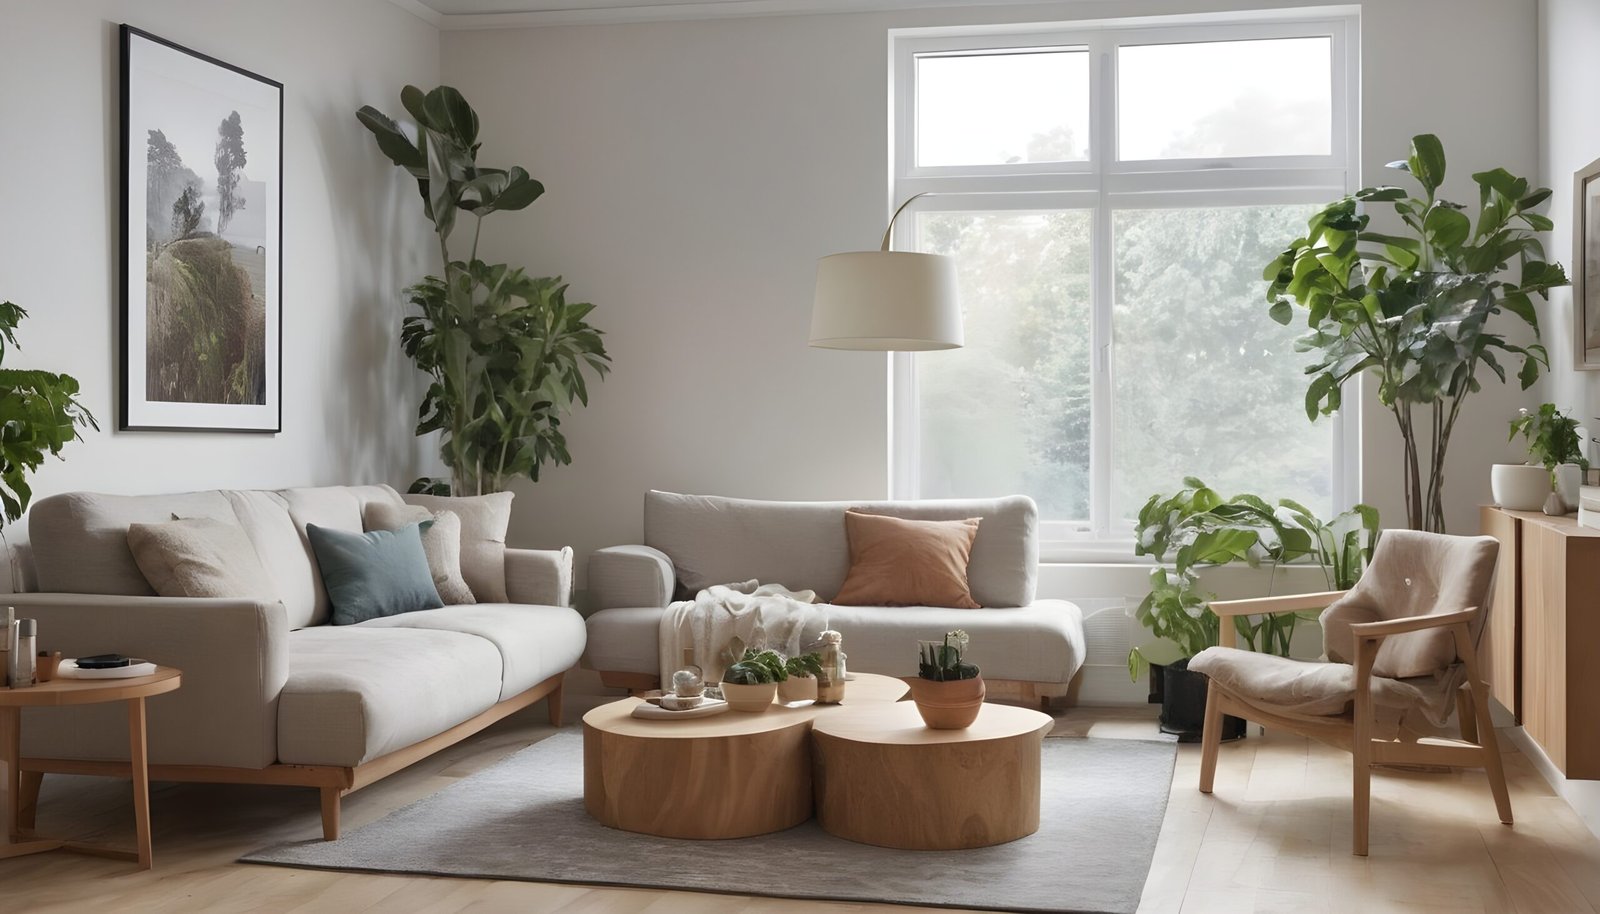 Benefits of biophilic design, a living room with earthy colors and lots of greenery.